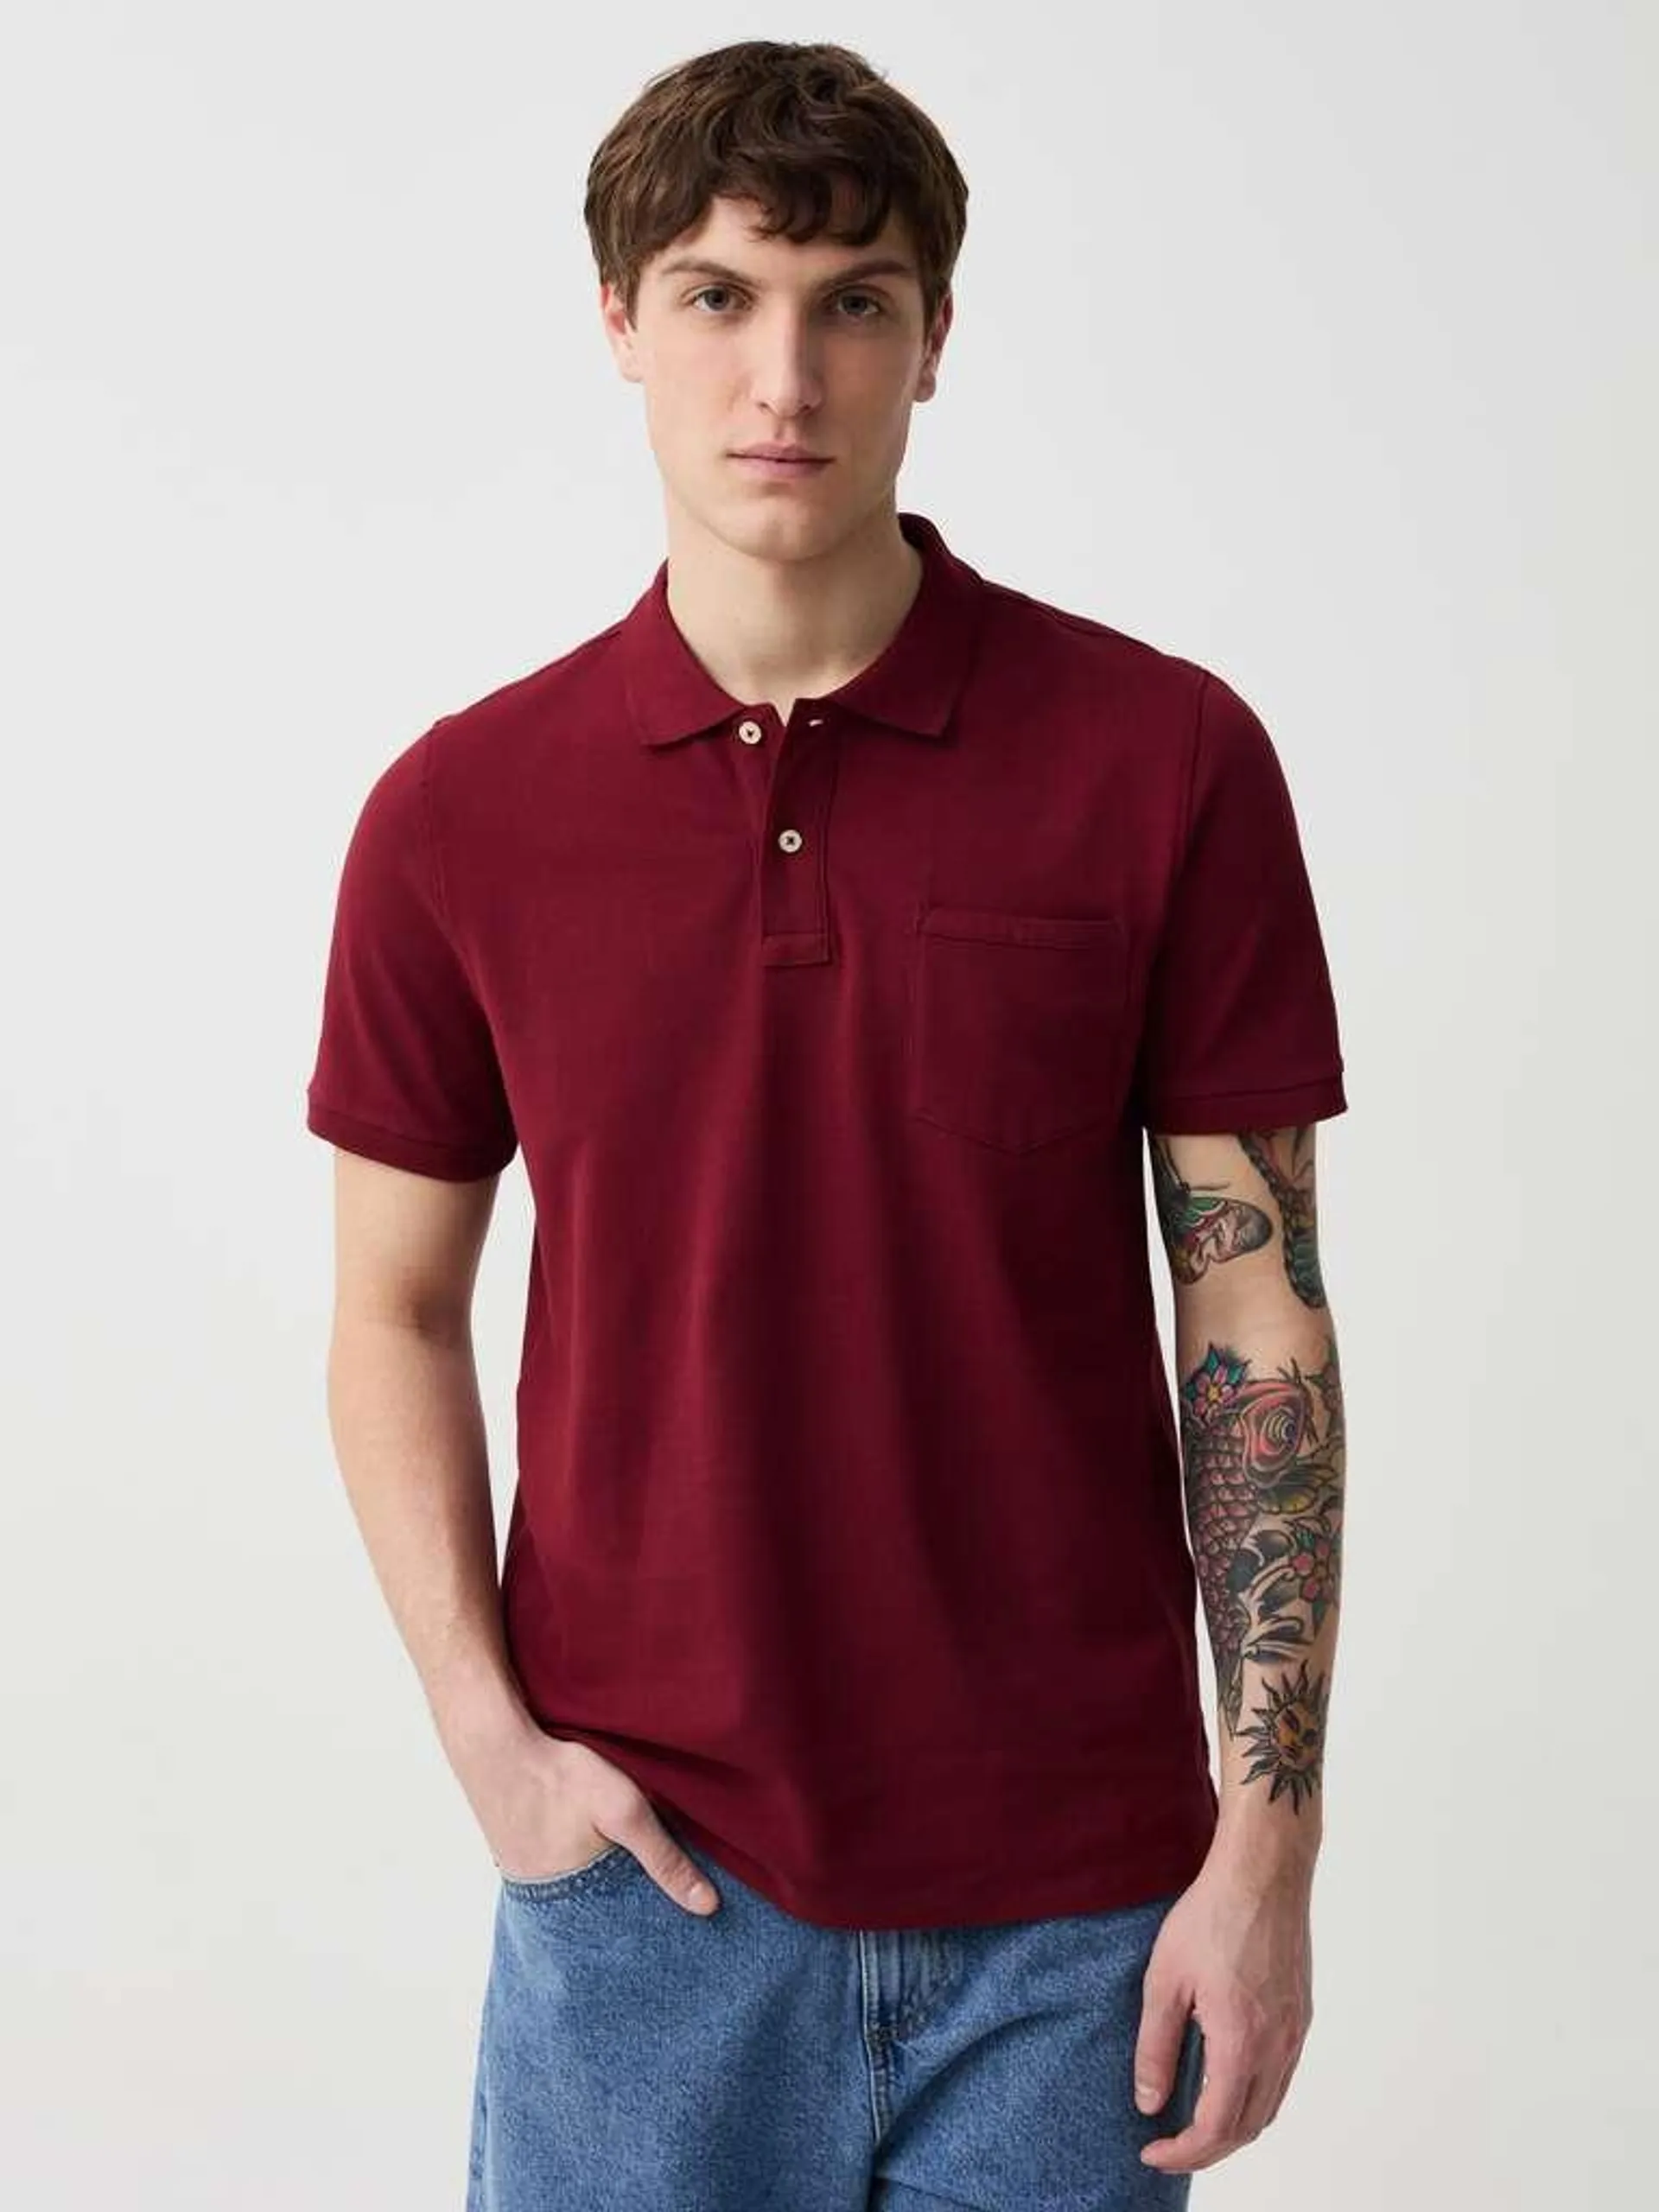 Claret Red Piquet polo shirt with pocket